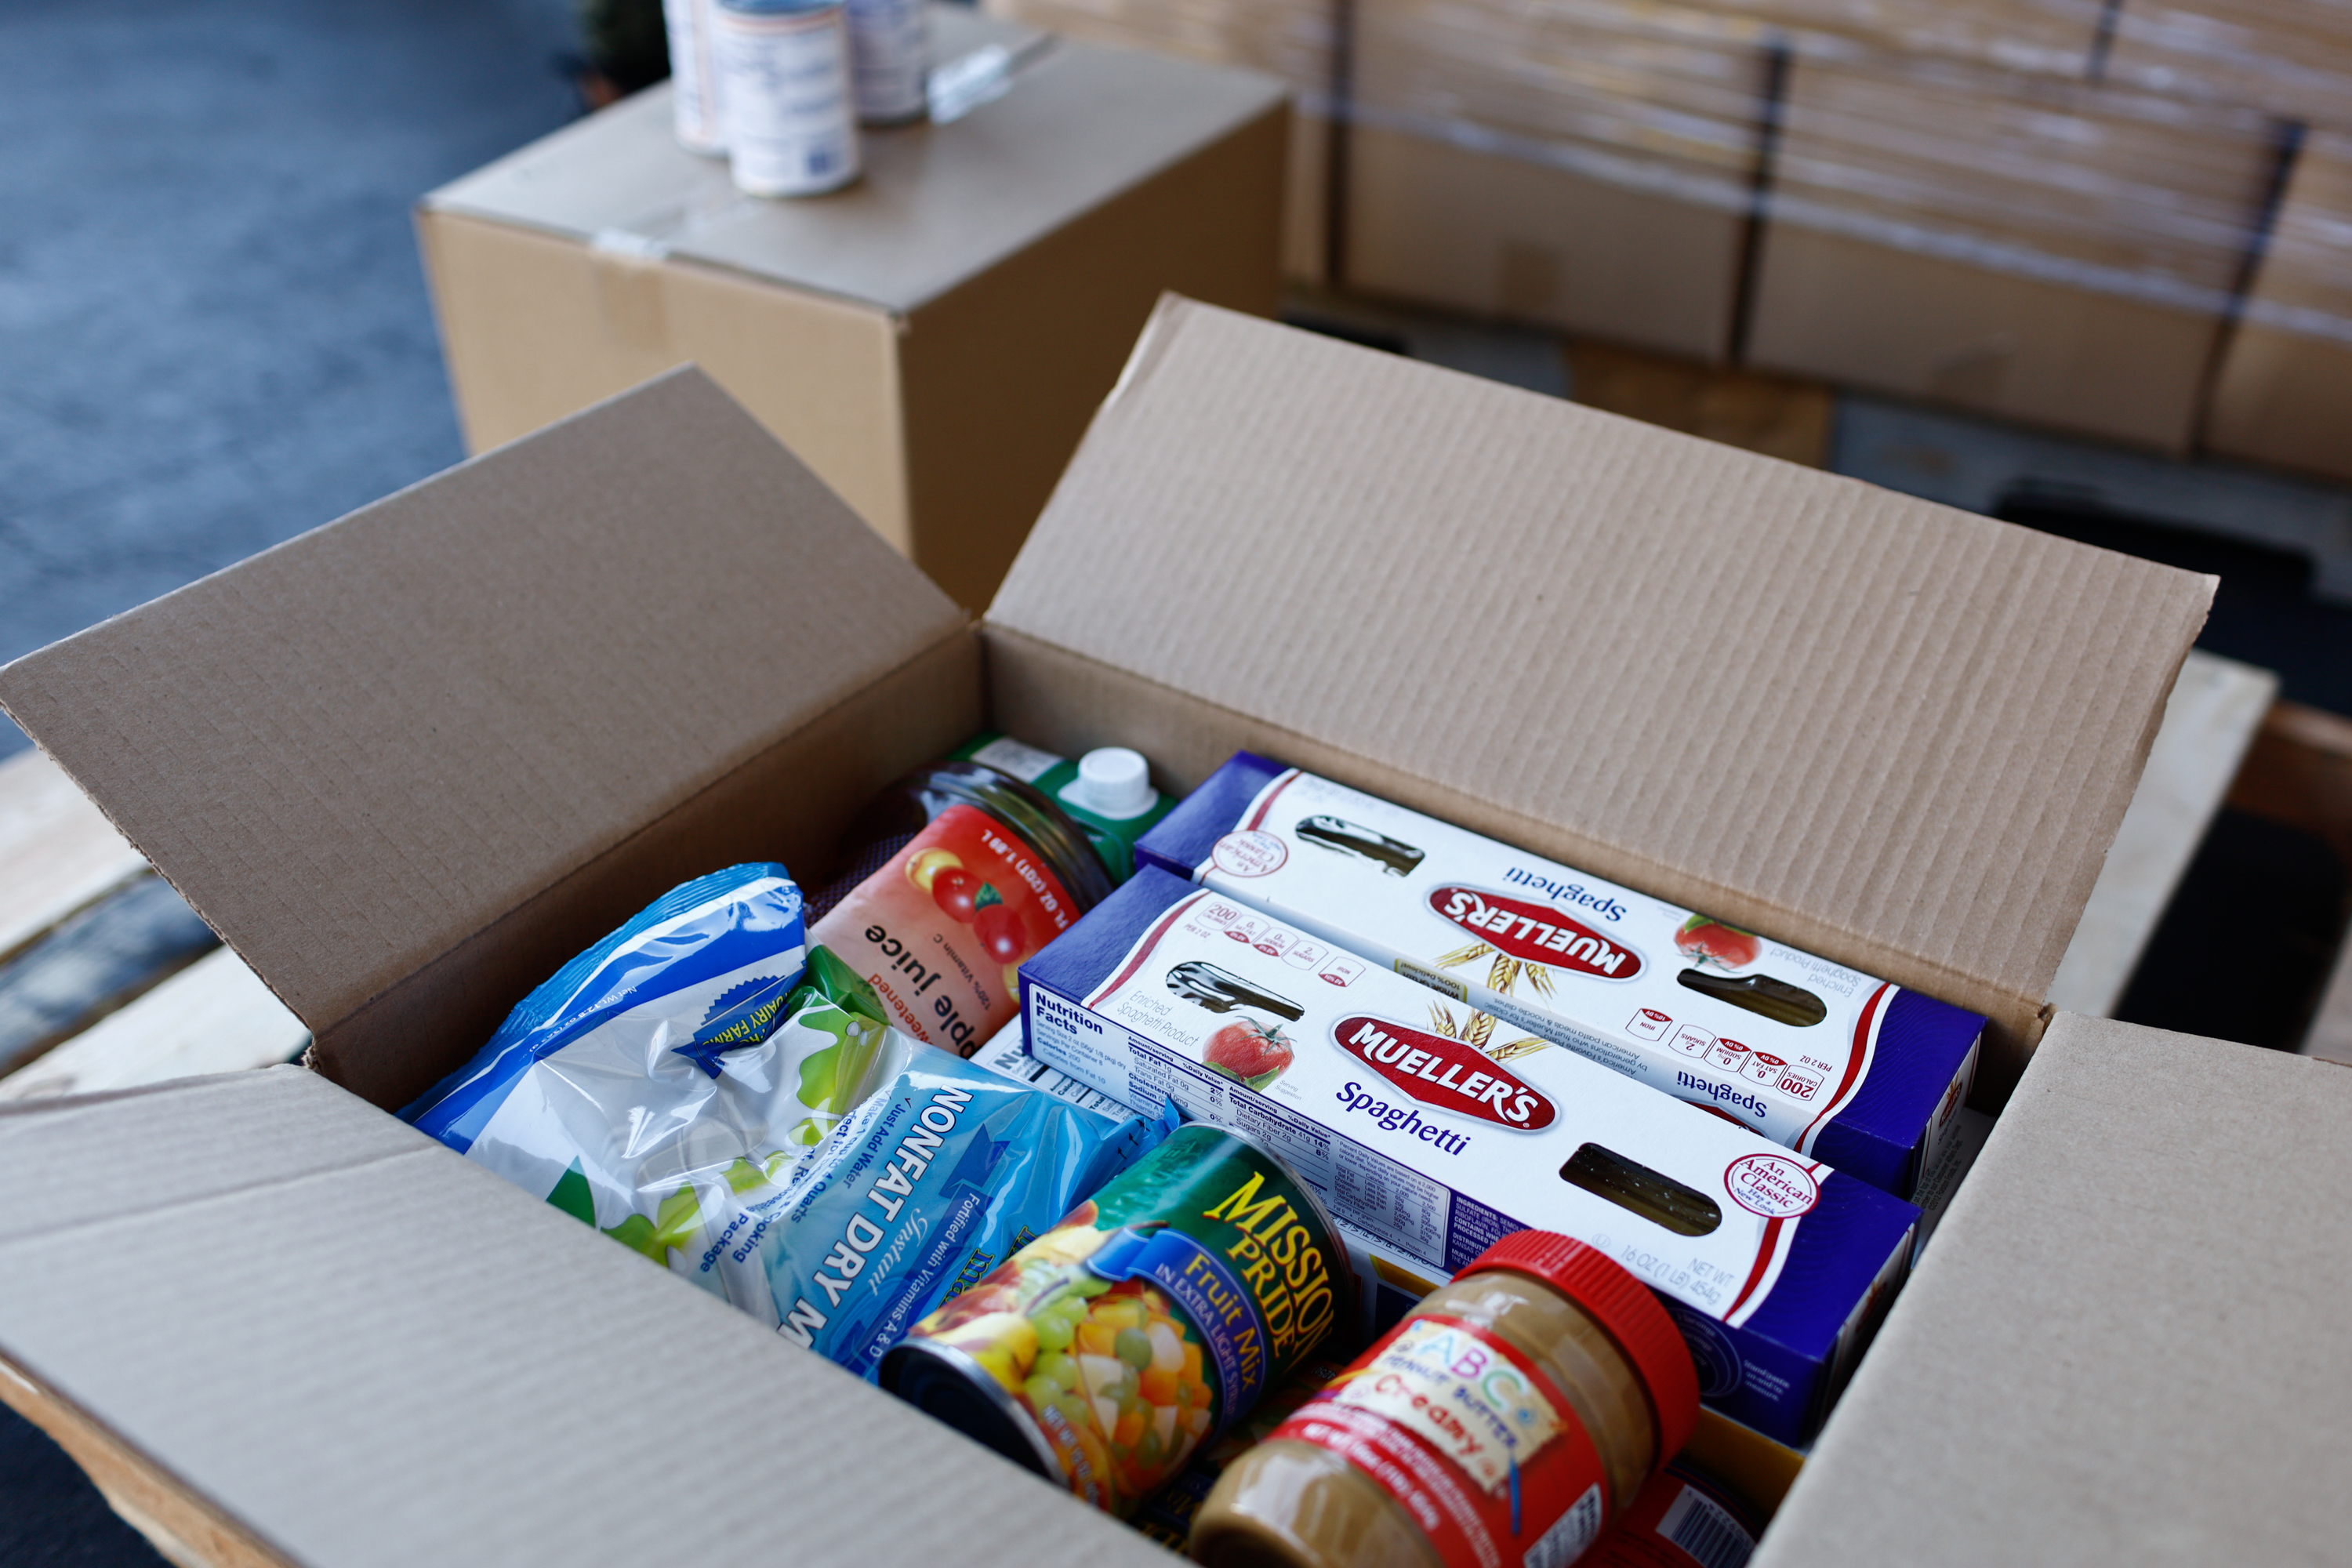 The North Texas Food Bank and their Feeding Network of Partner Agencies have doubled food distribution efforts as the COVID-19 pandemic continues to impact North Texans food security. 